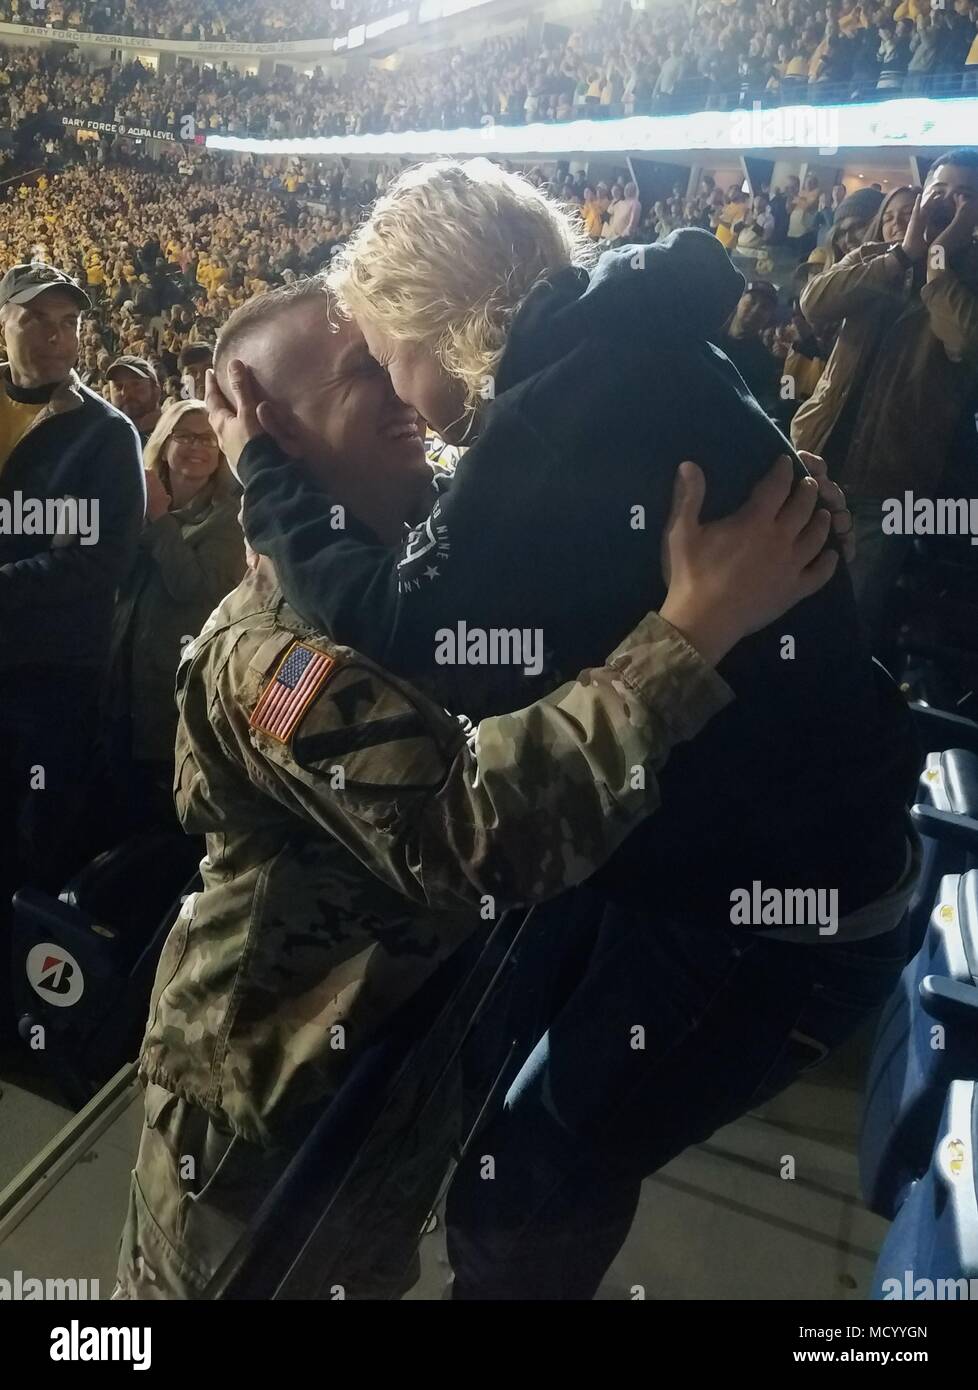 Nashville Preds surprise Army soldier with ticket package after